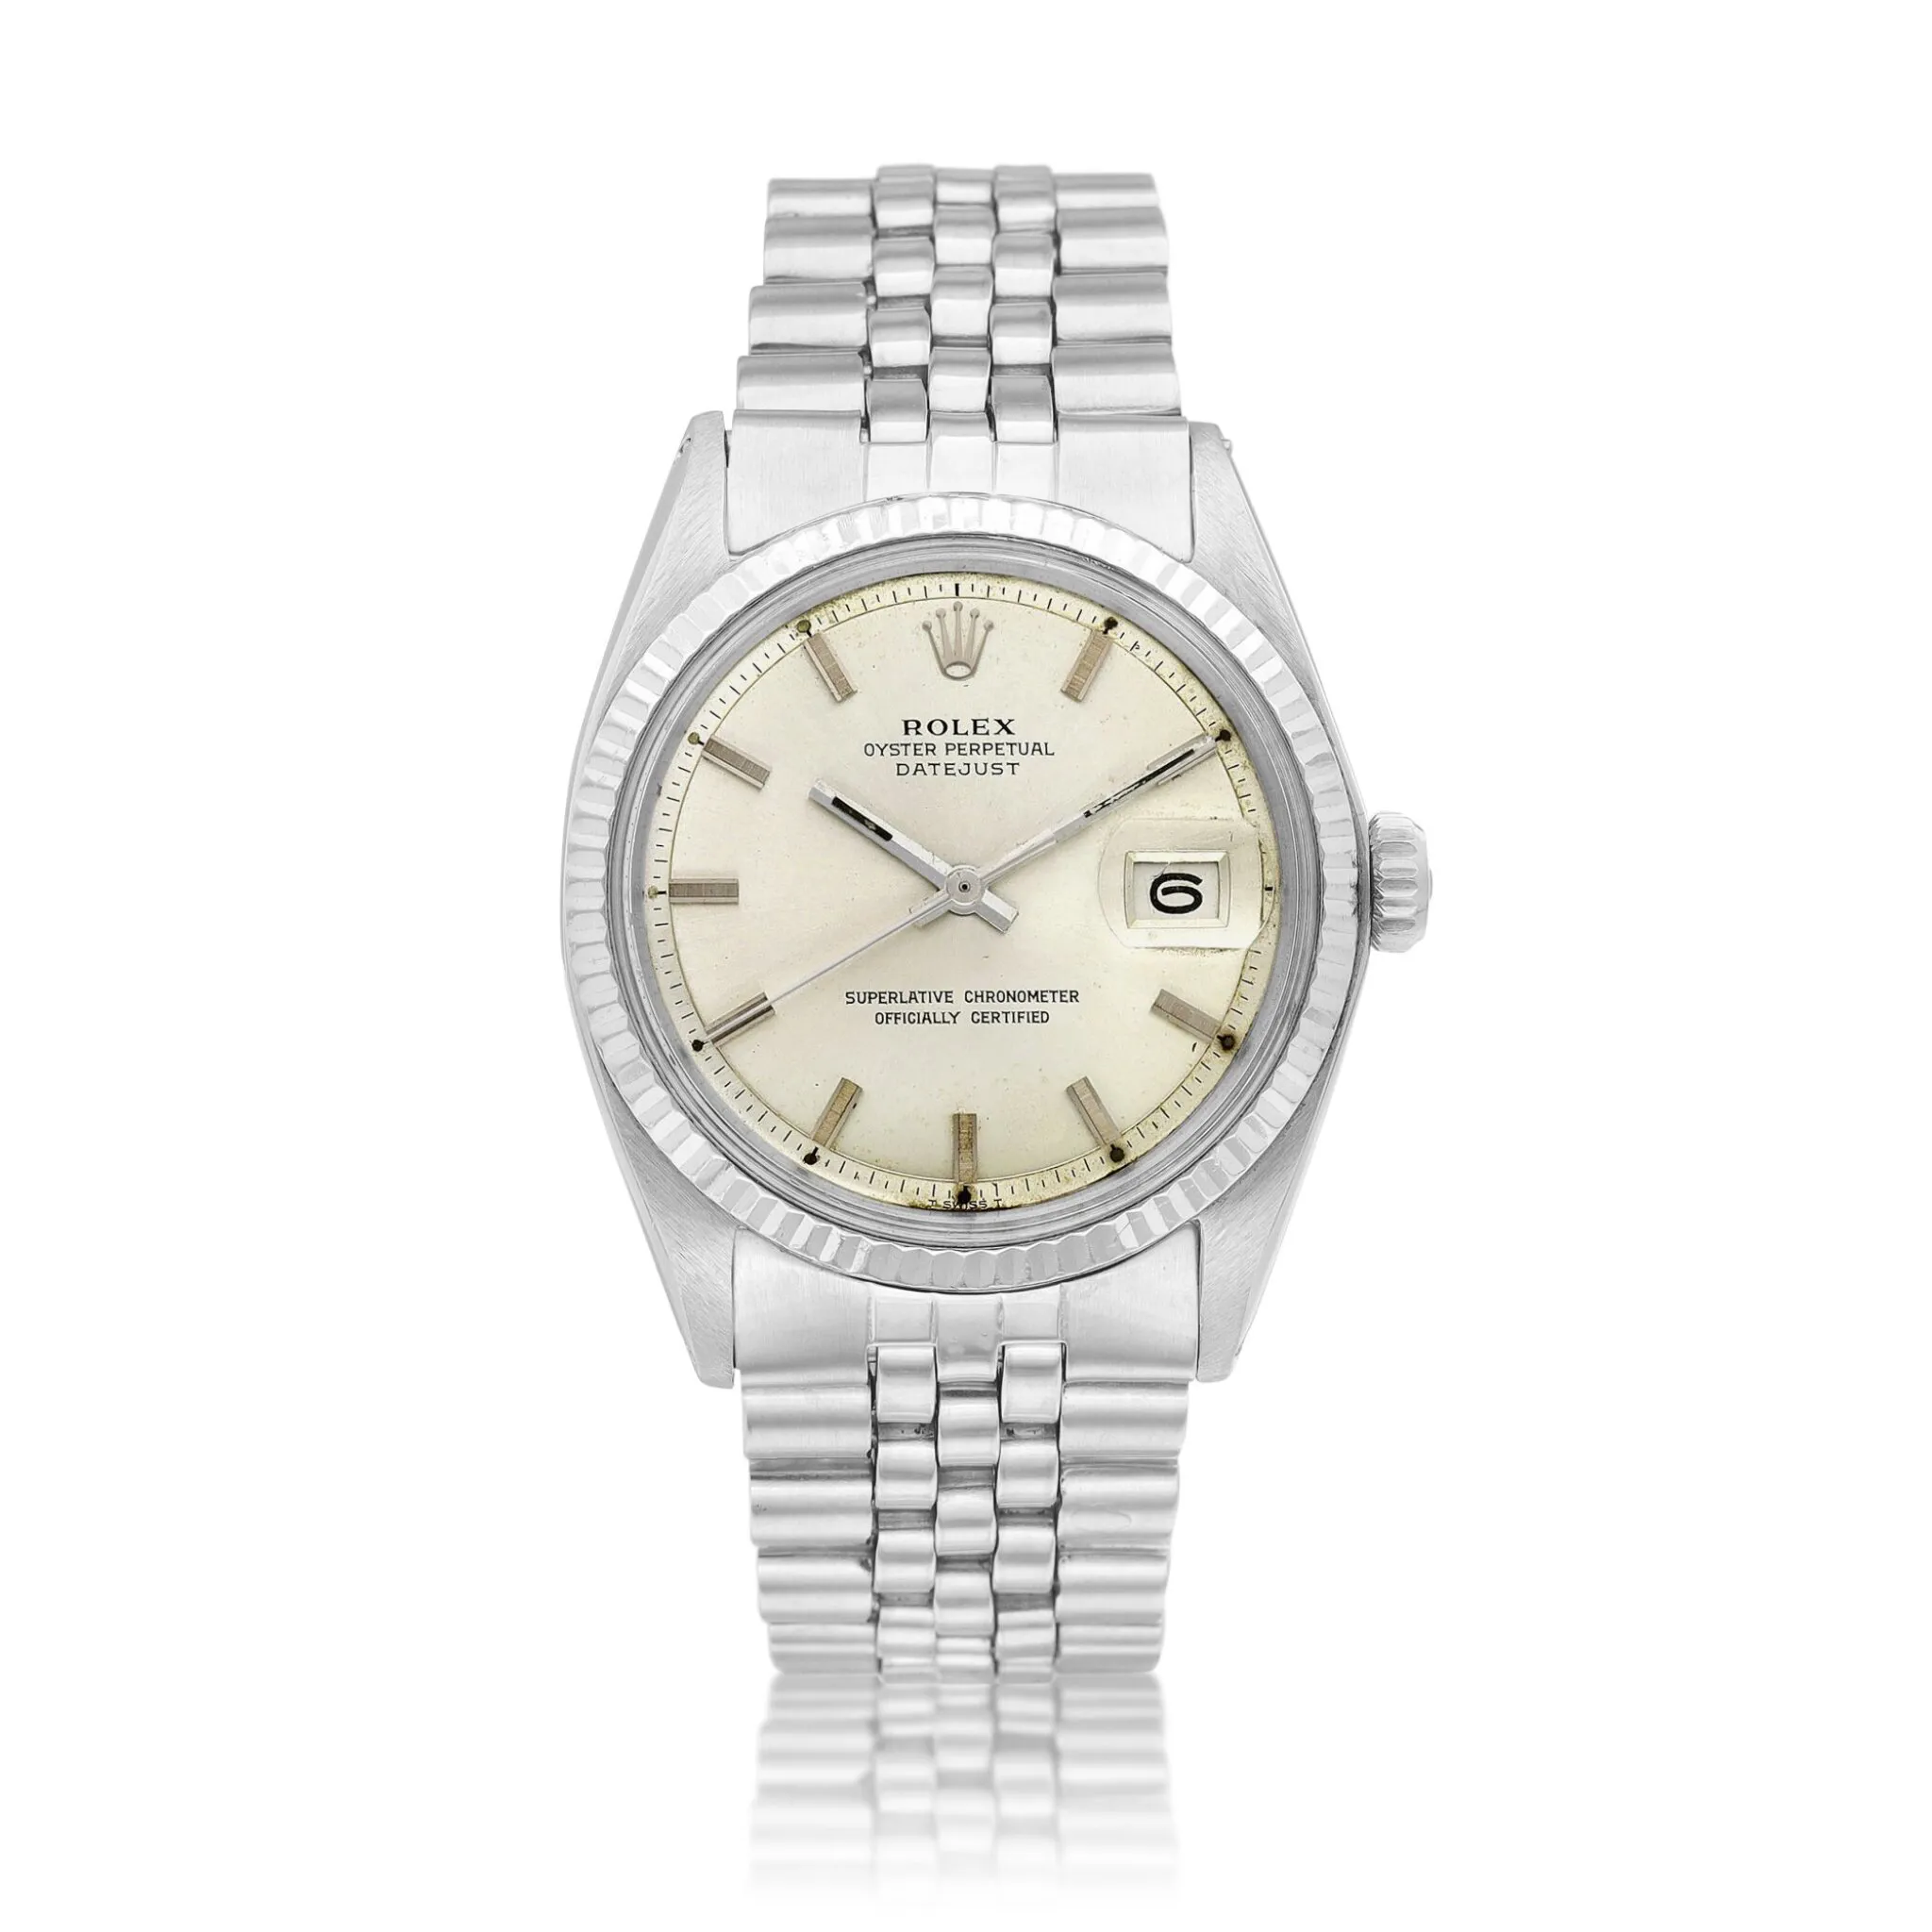 Rolex Datejust 1601 36mm Stainless steel Silver